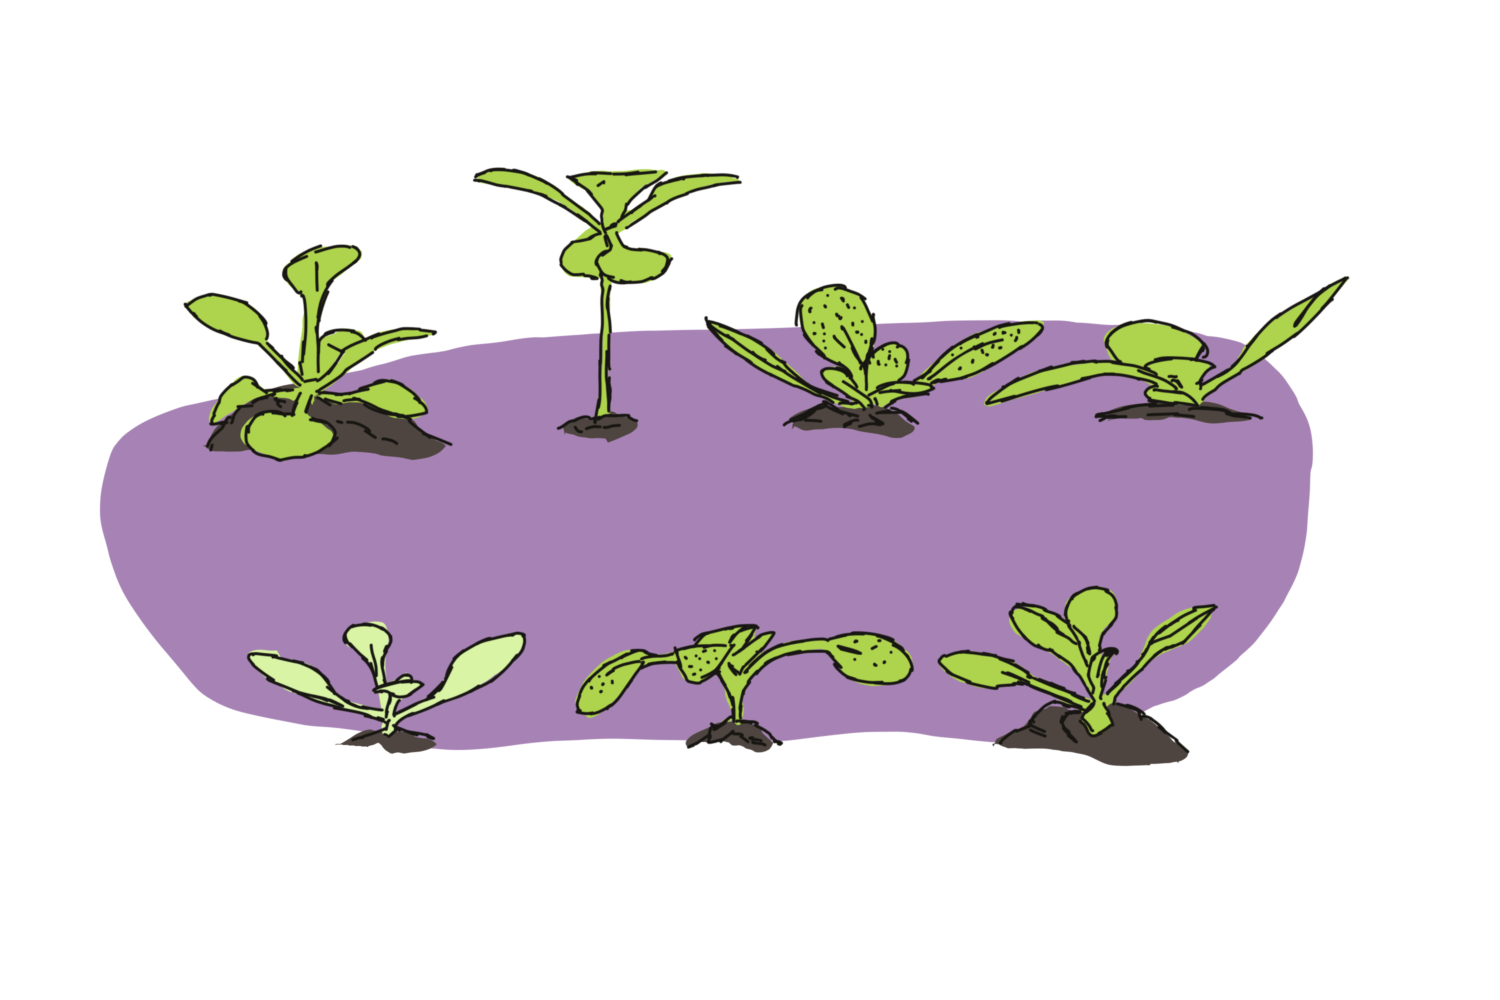 There’s no such thing as ‘the’ Arabidopsis genome